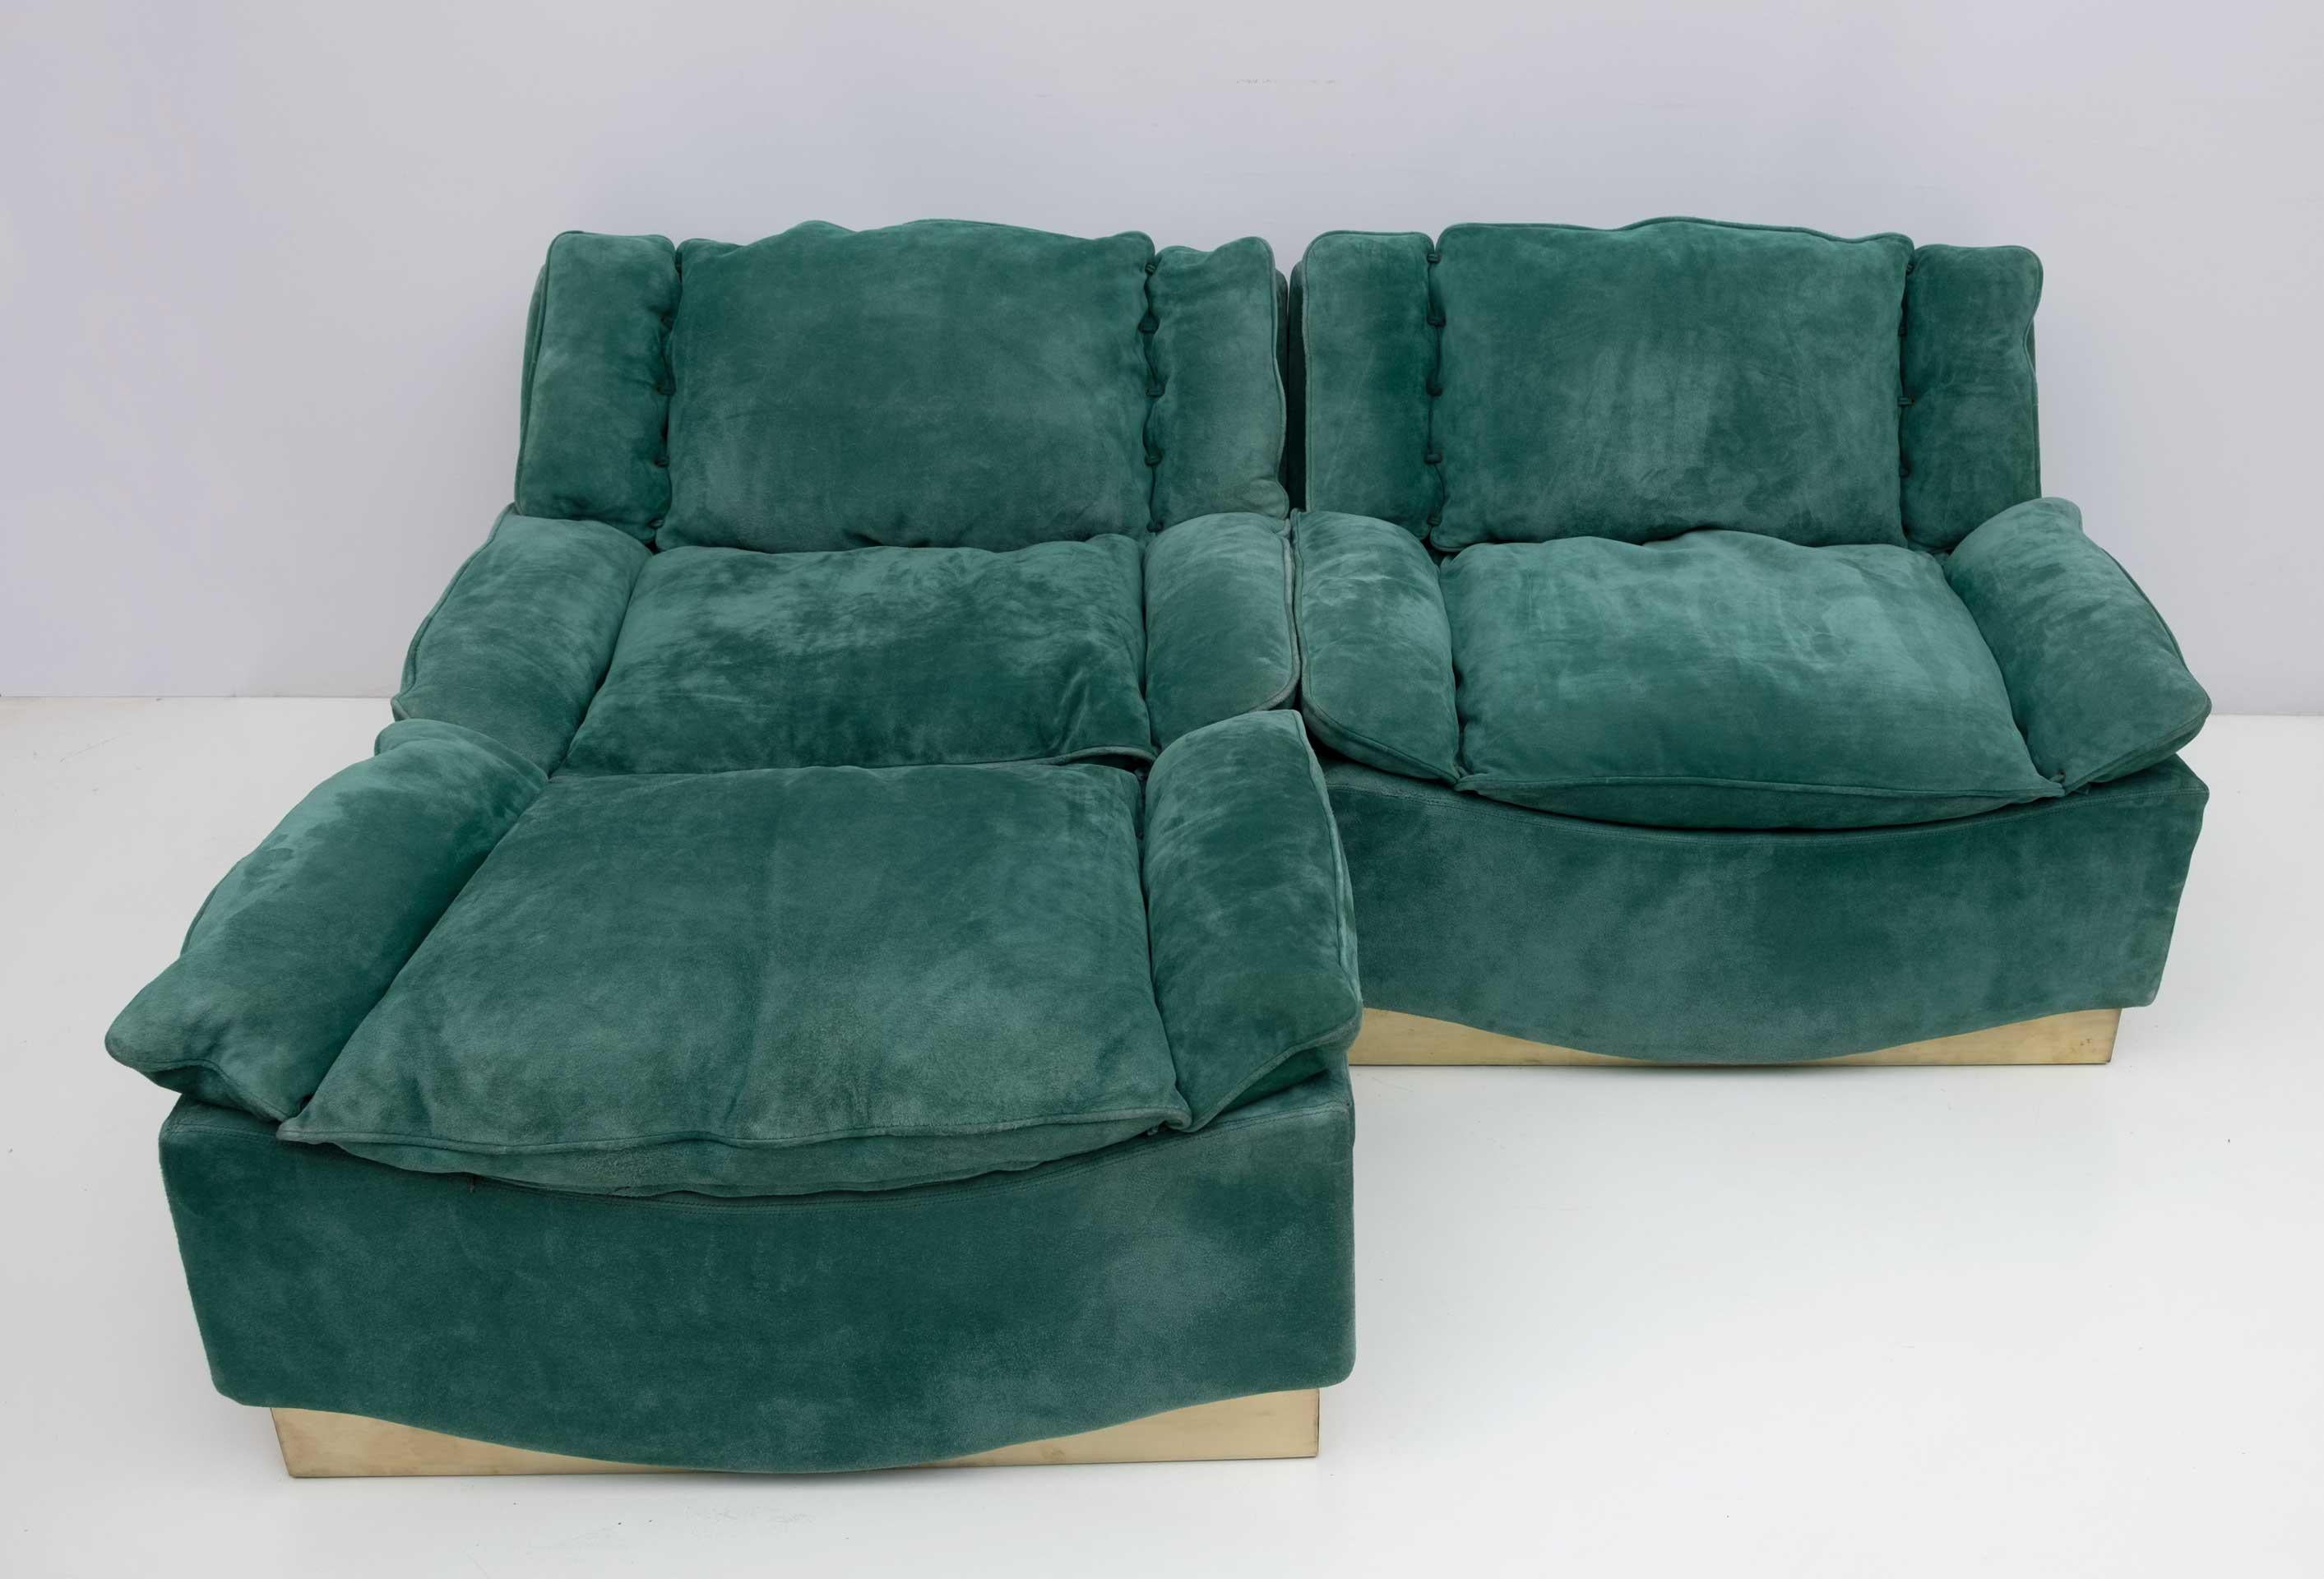 Italian Pair of Luciano Frigerio Mid-Century Modern Suede Armchairs and Footrest, 1970s For Sale